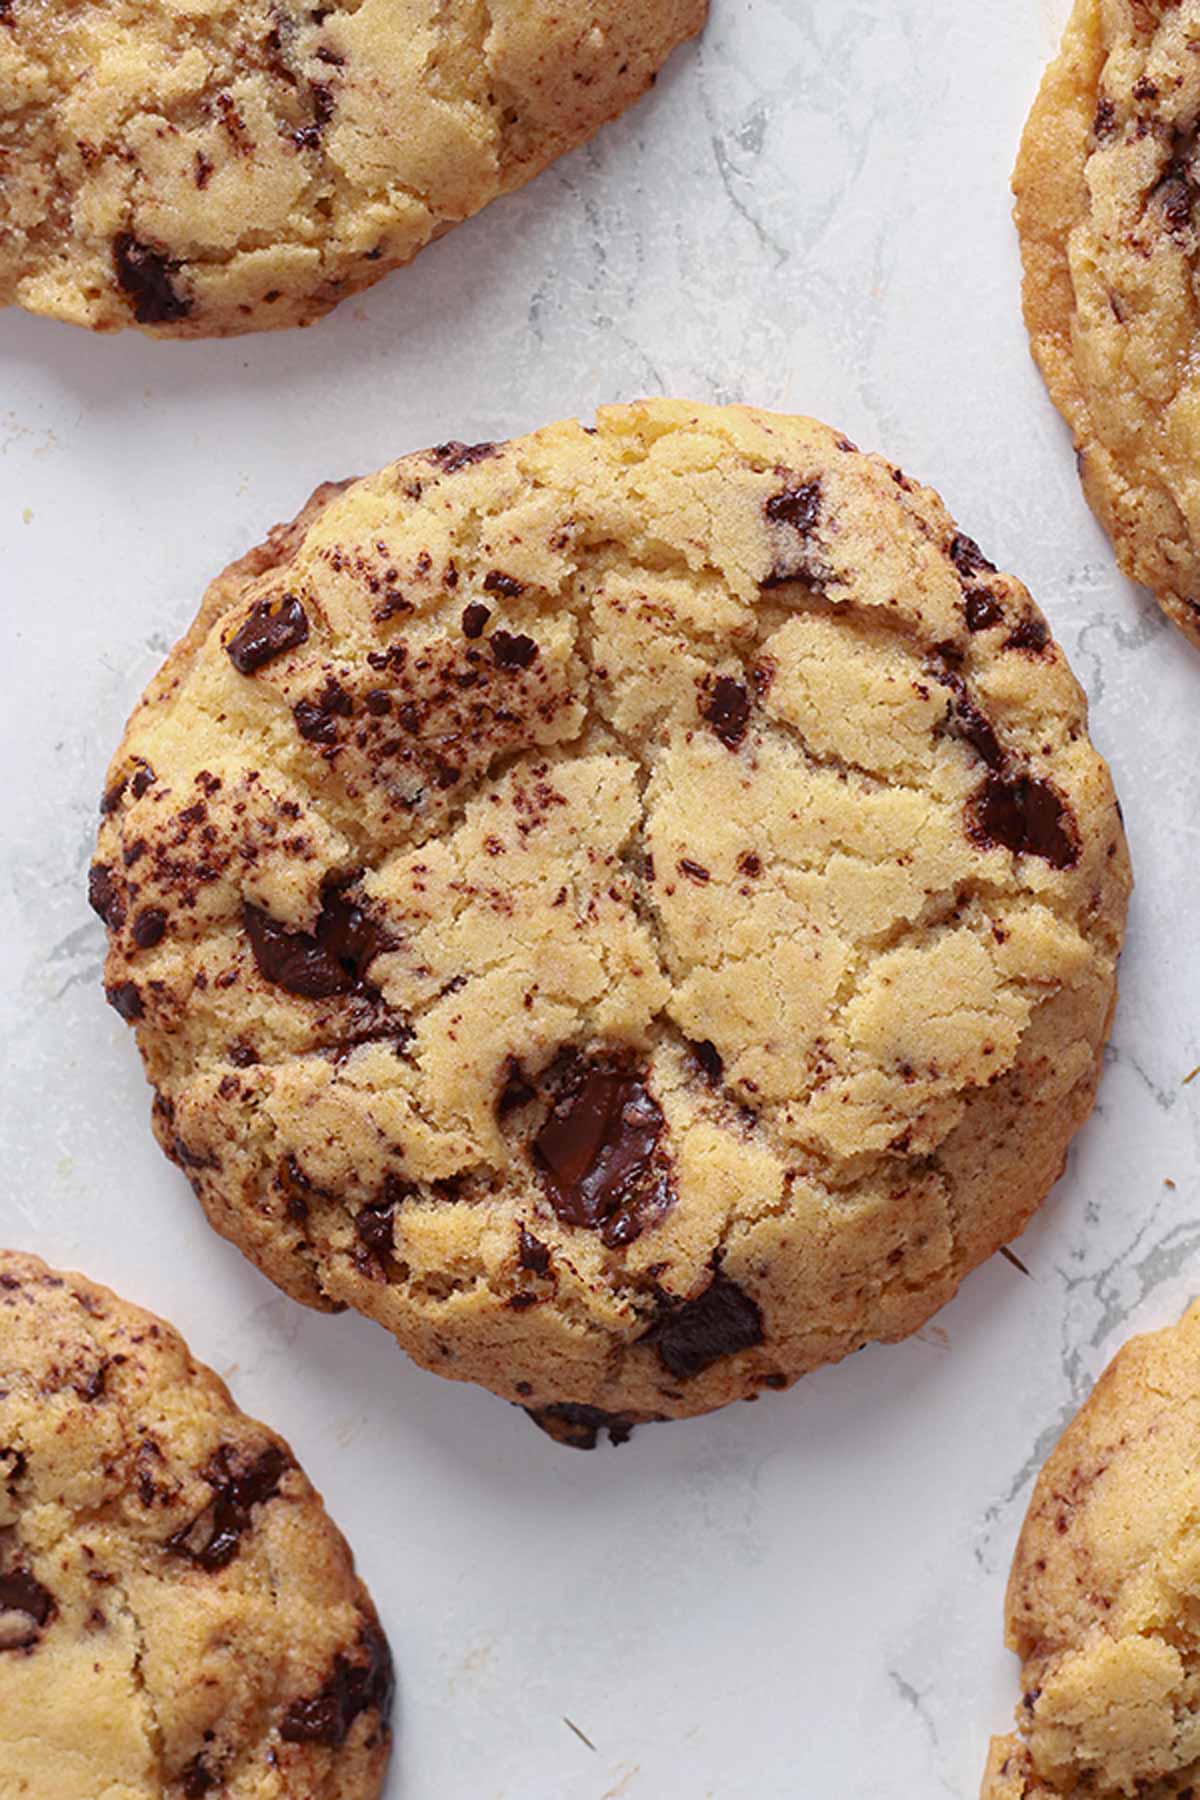 5 Chocolate Chip Gluten Free Cookies On A White Surface